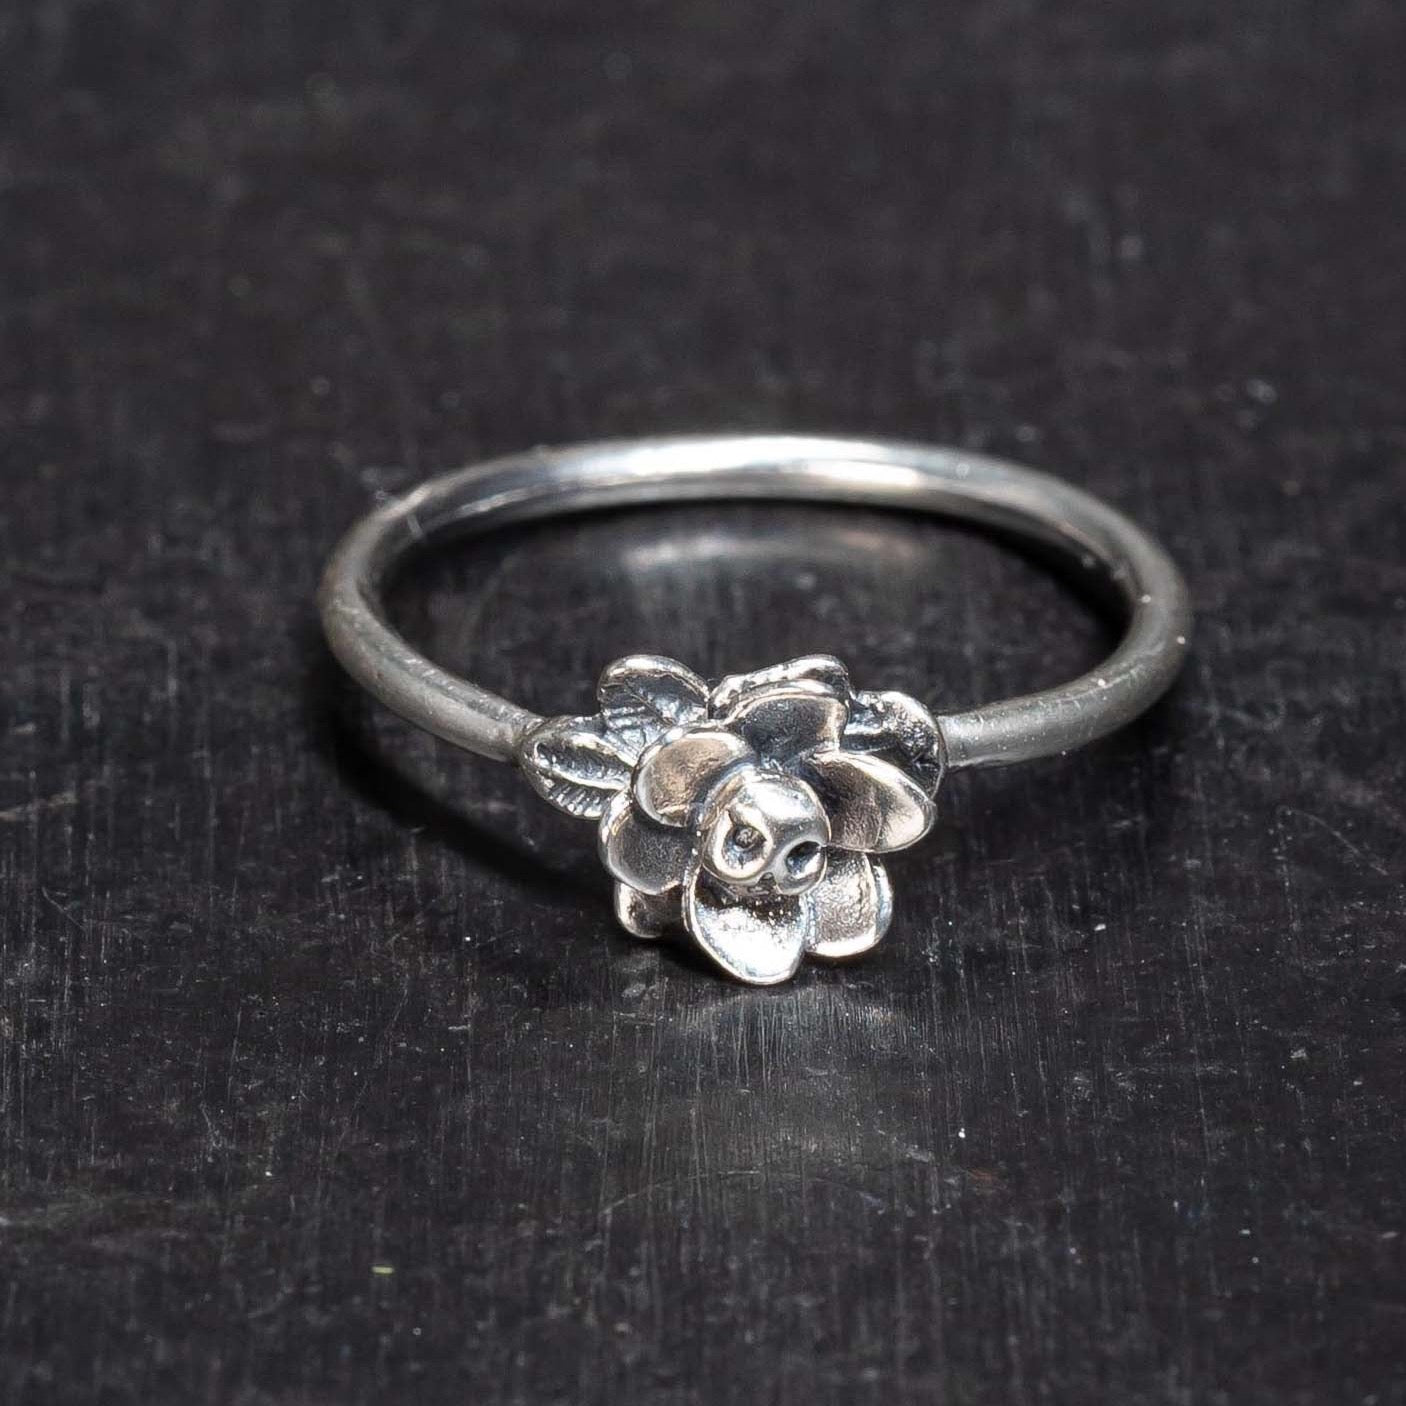 Silver poisonous plant inspired ring